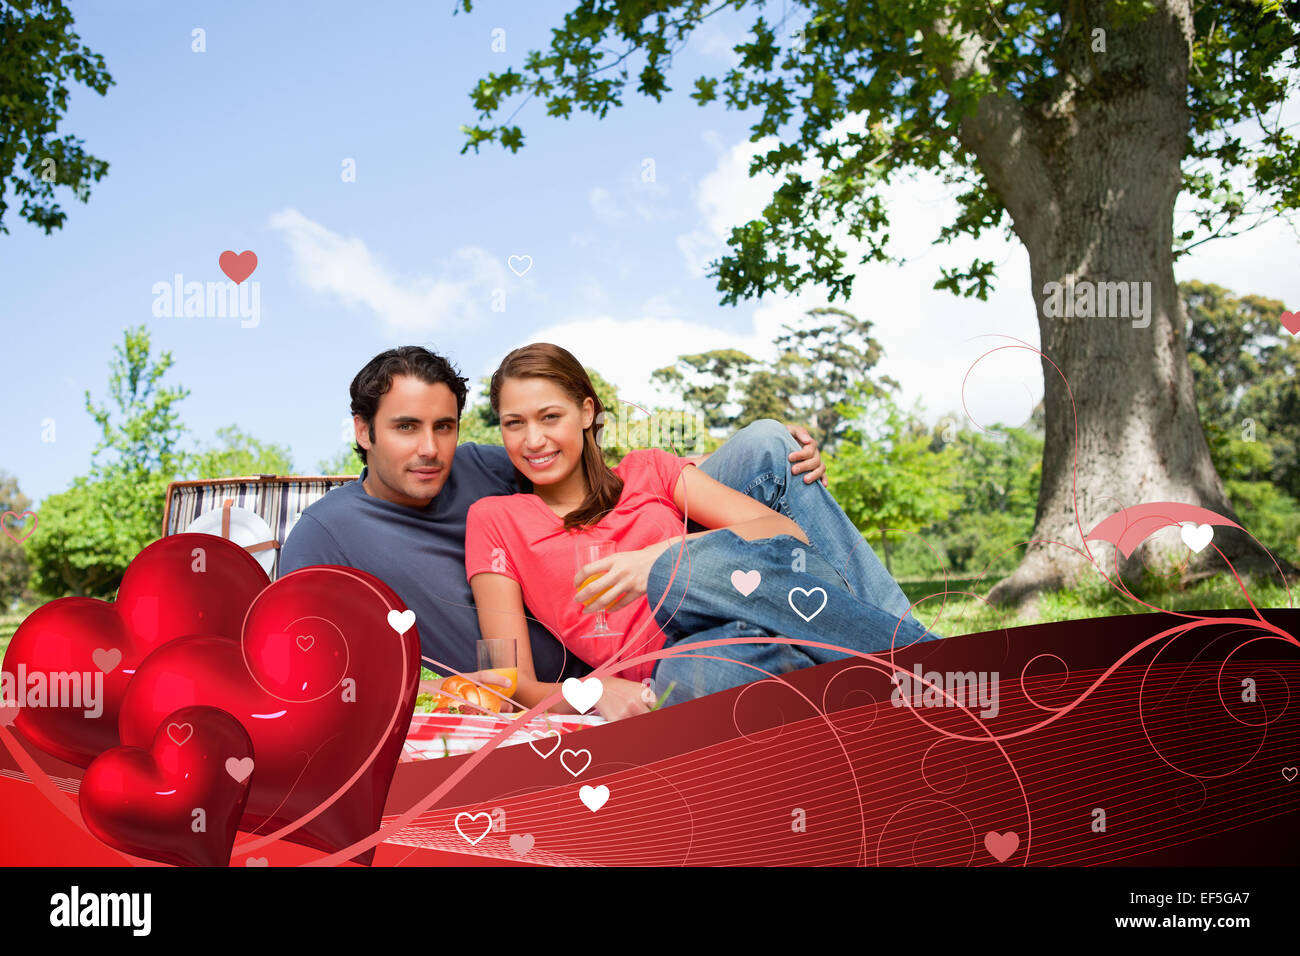 Composite image of two friends looking ahead while they hold glasses as they have a picnic Stock Photo